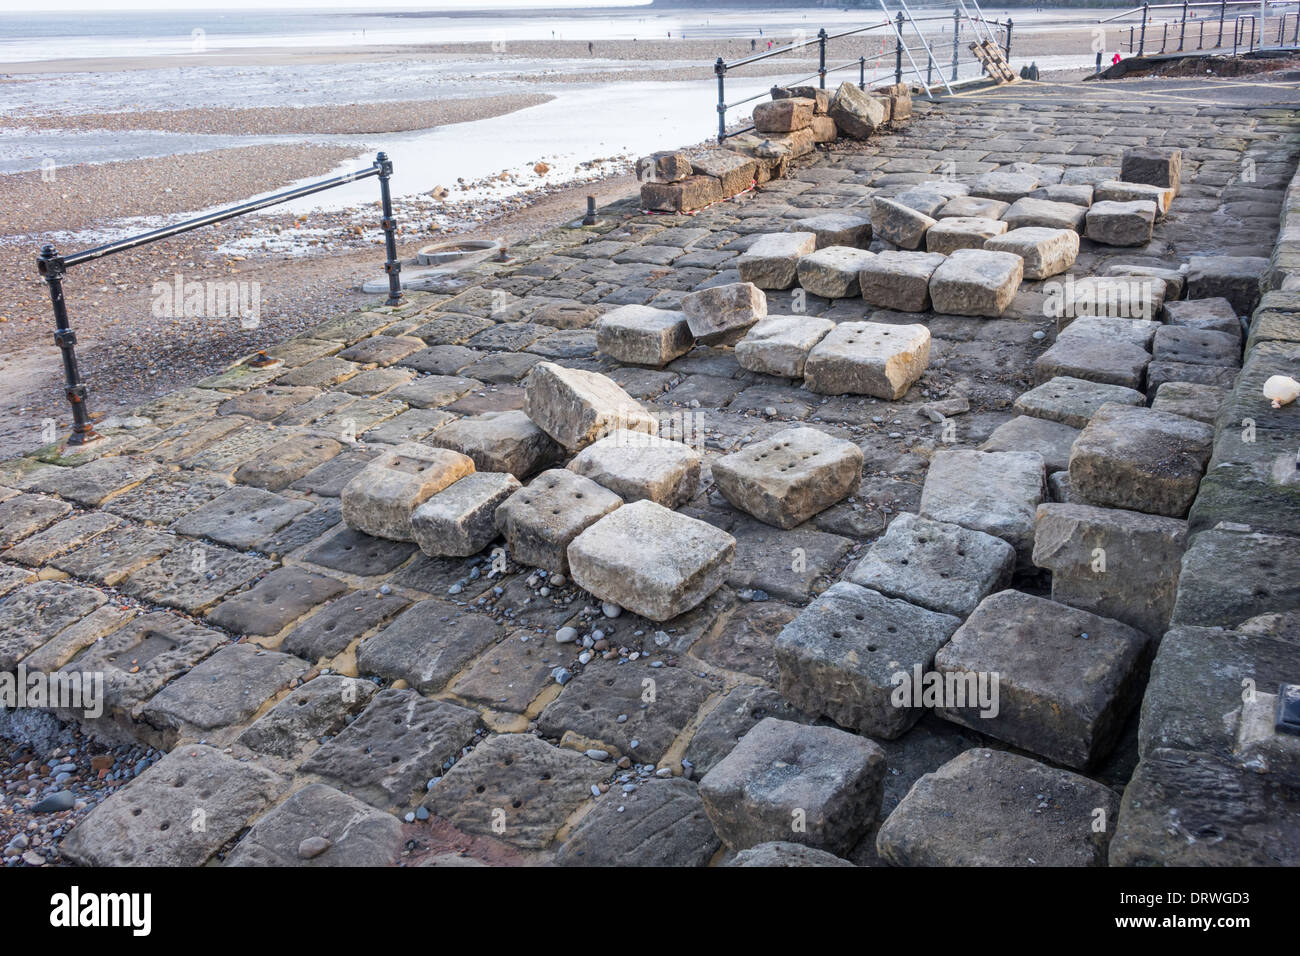 Stone blocks formerly used to support railway lines used in a beach walkway in Saltburn being rebuilt after storm damage Stock Photo